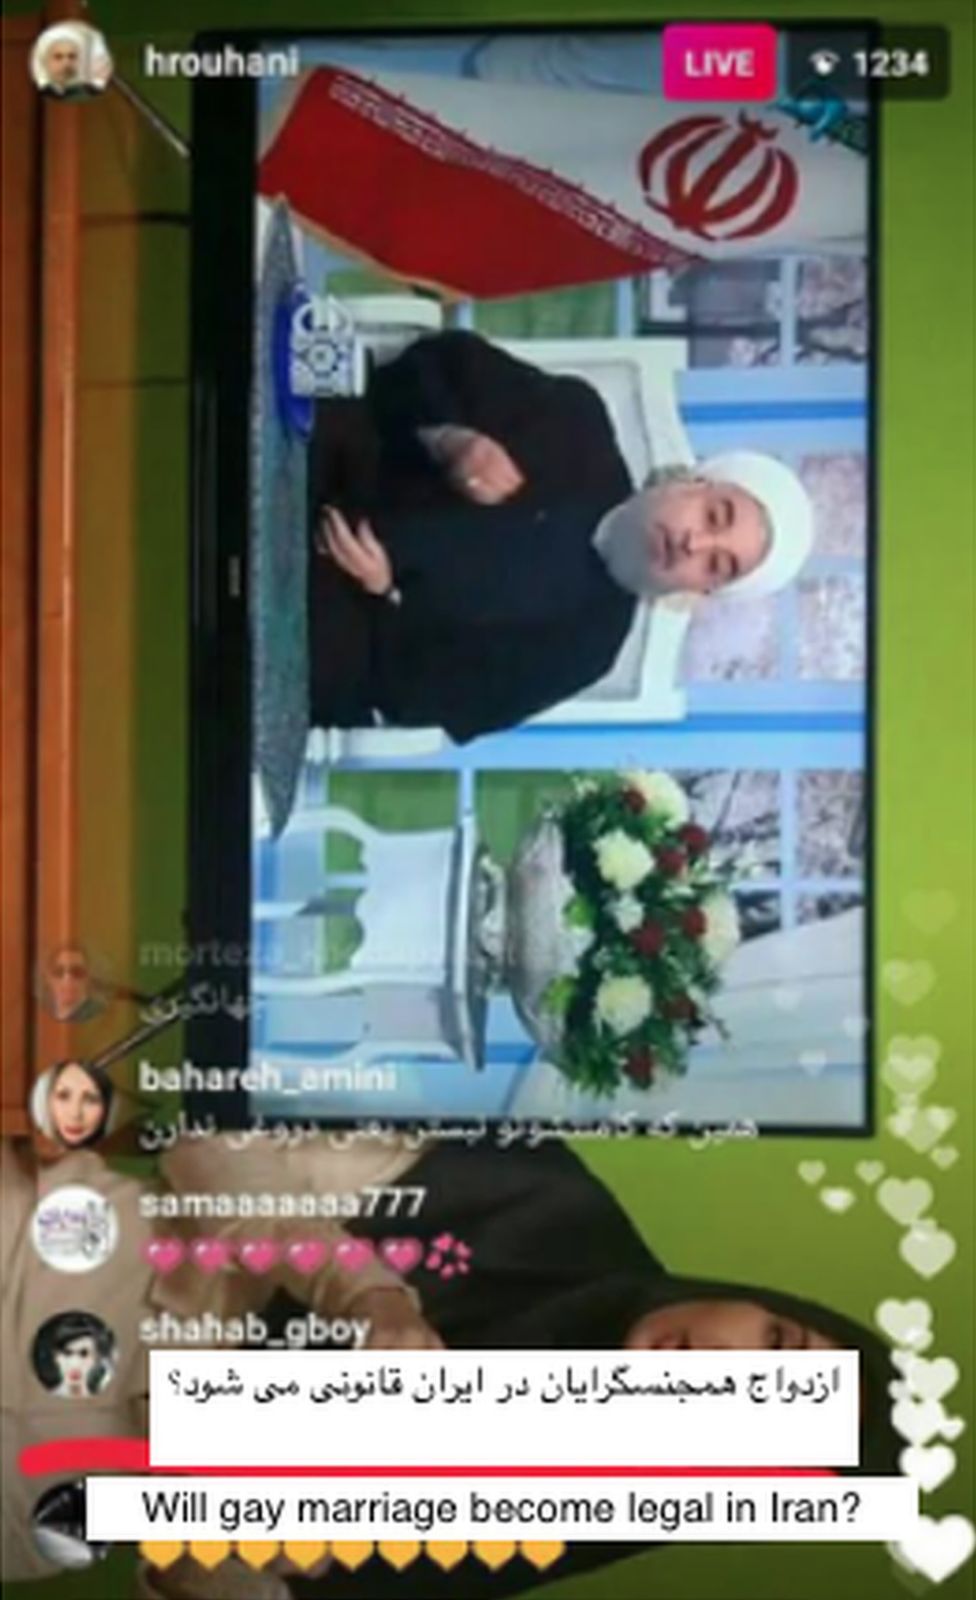 LGBT activist asks "will gay marriage become legal in Iran" during a live stream of a speech by Hassan Rouhani